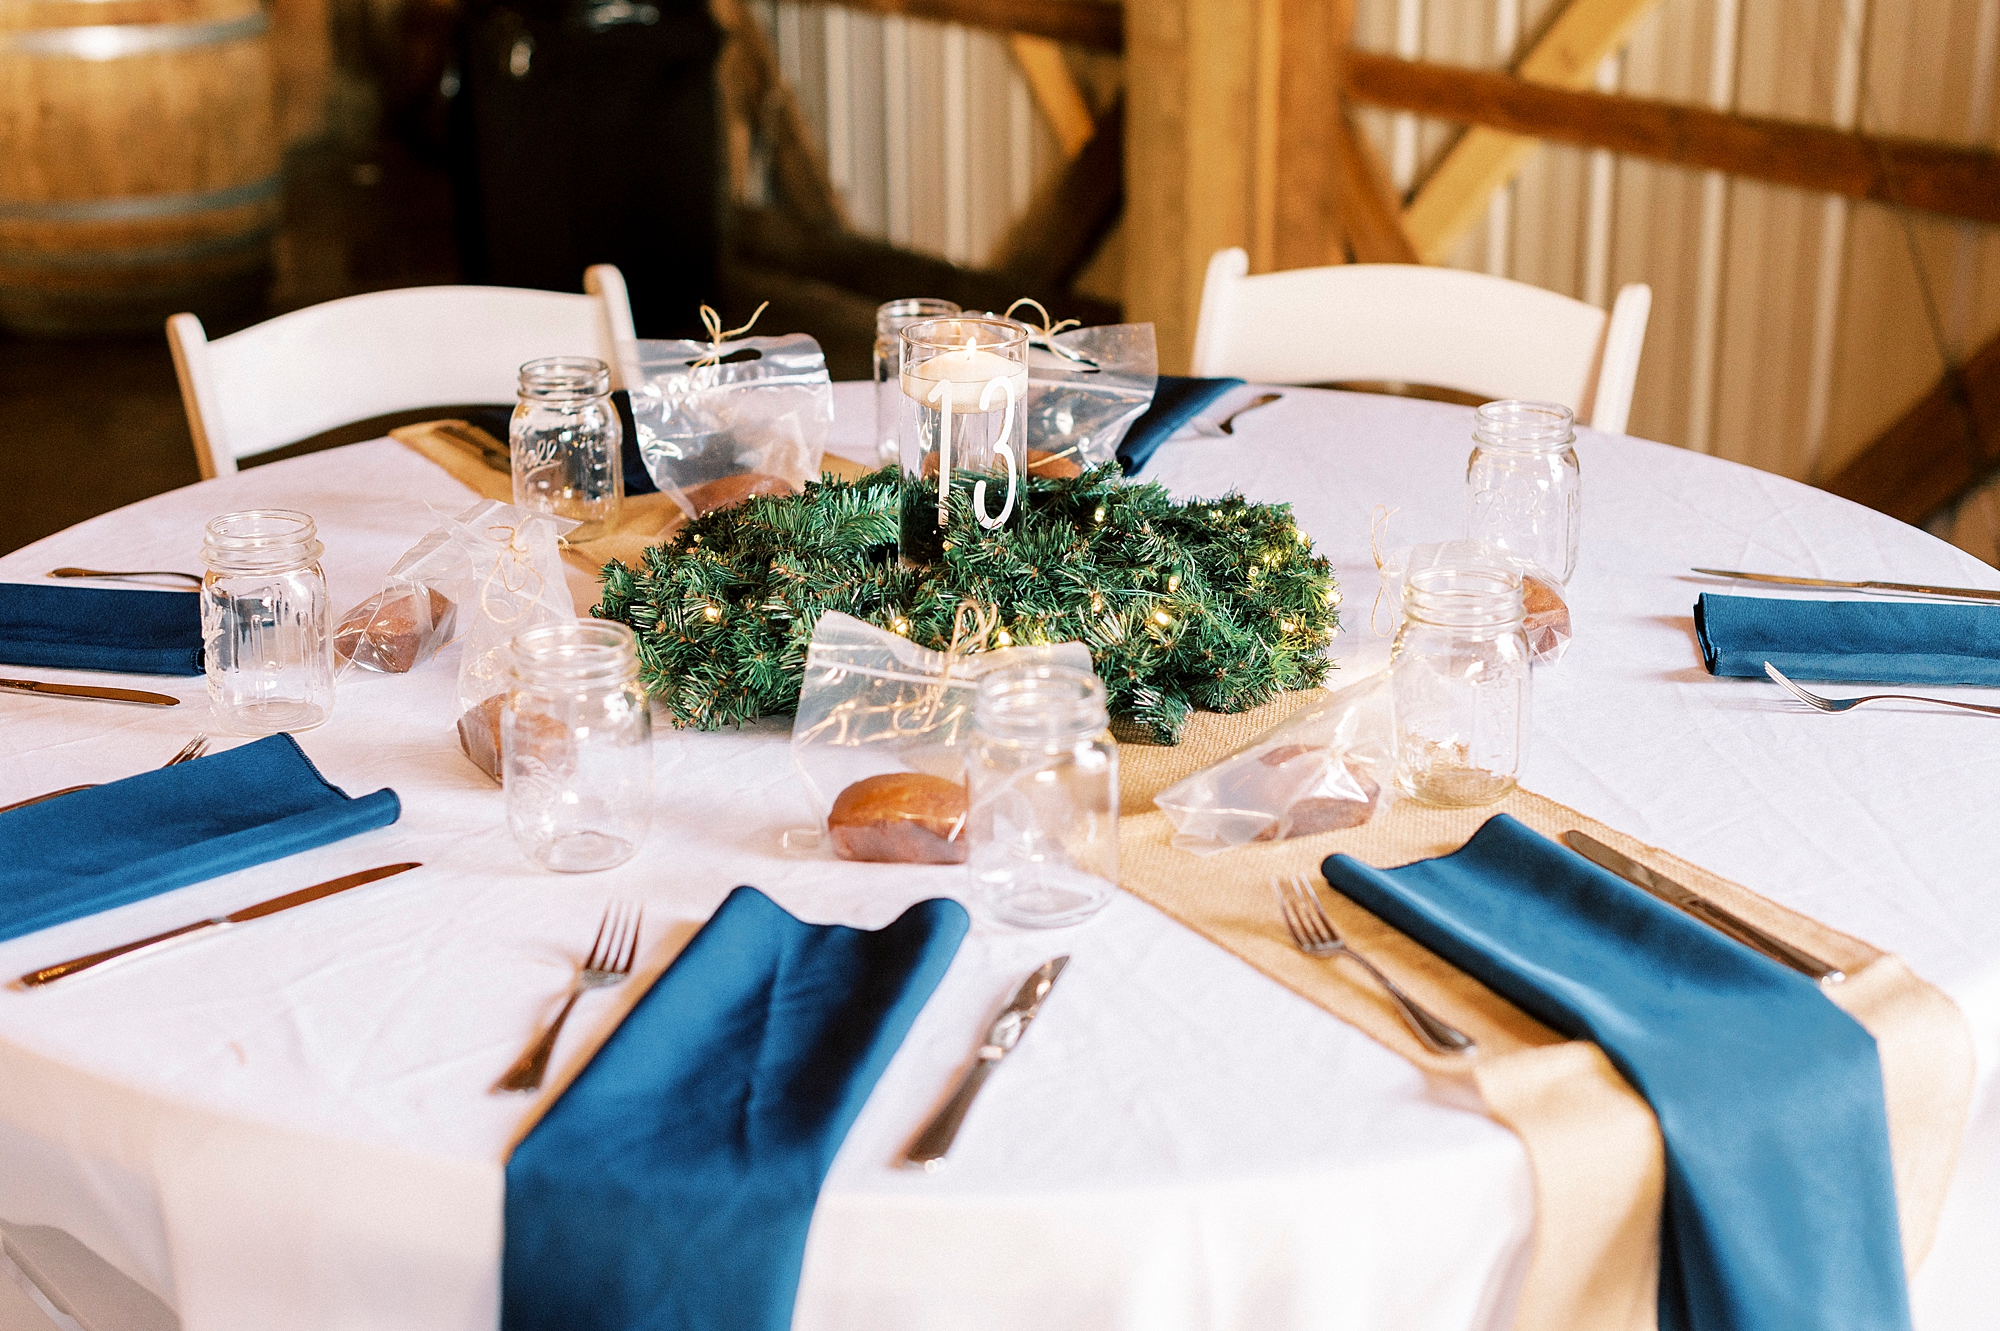 wedding reception place setting with blue napkins and greenery centerpieces at the Farm at Brusharbor